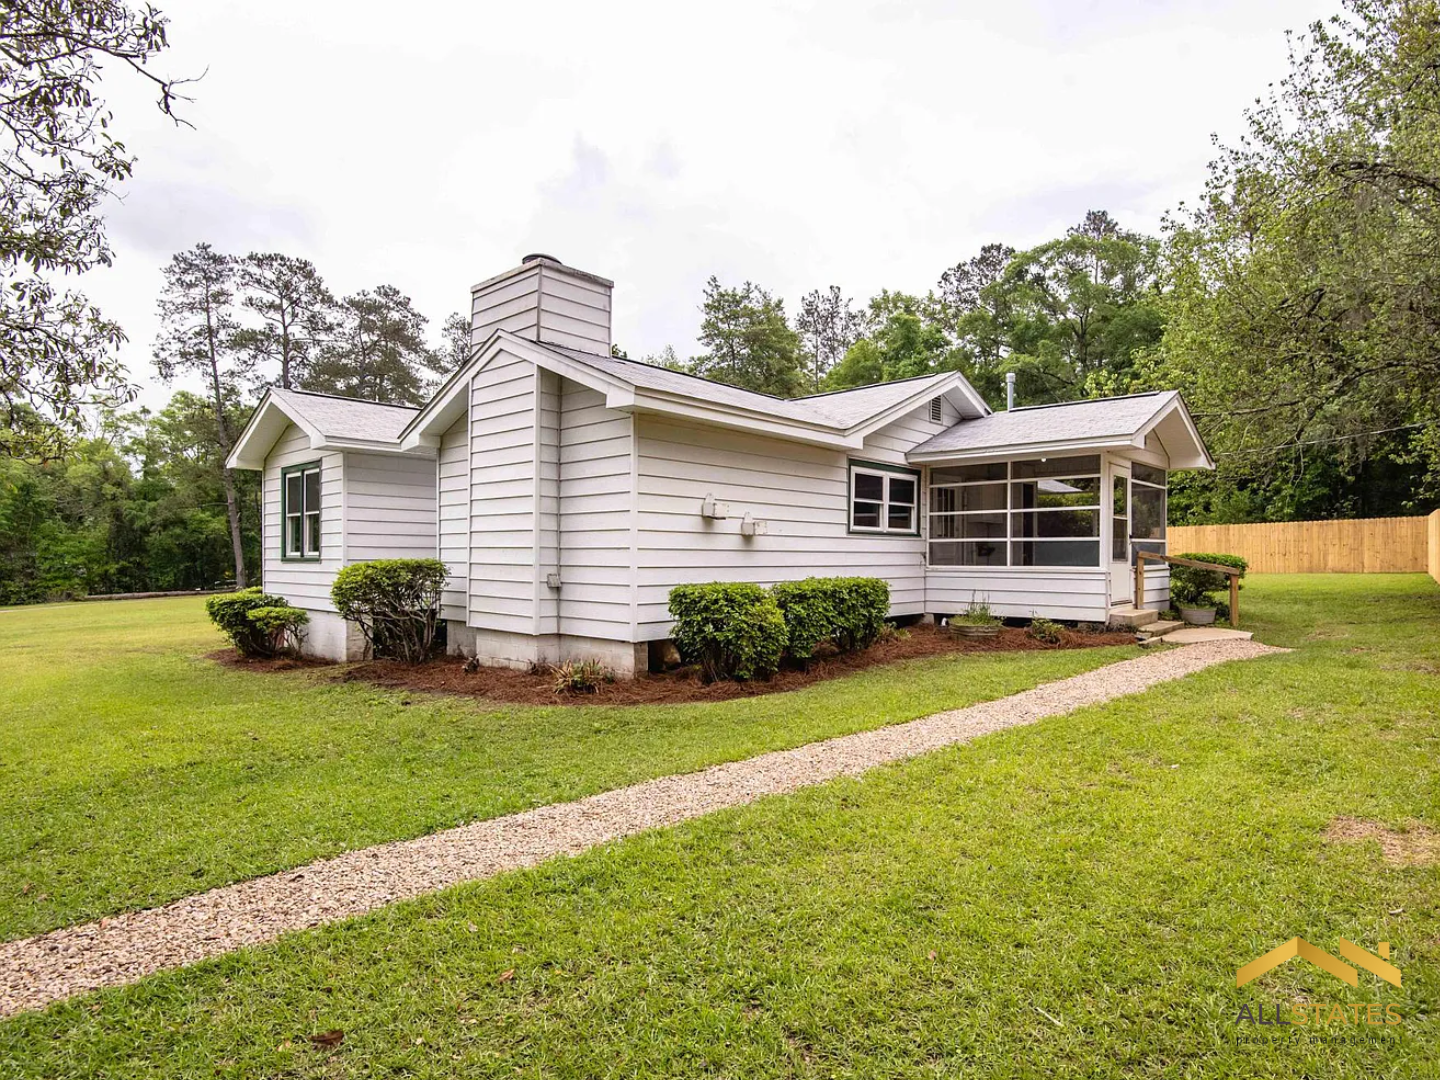 Photo of property: 3022 Livingston Rd, Tallahassee, FL 32303